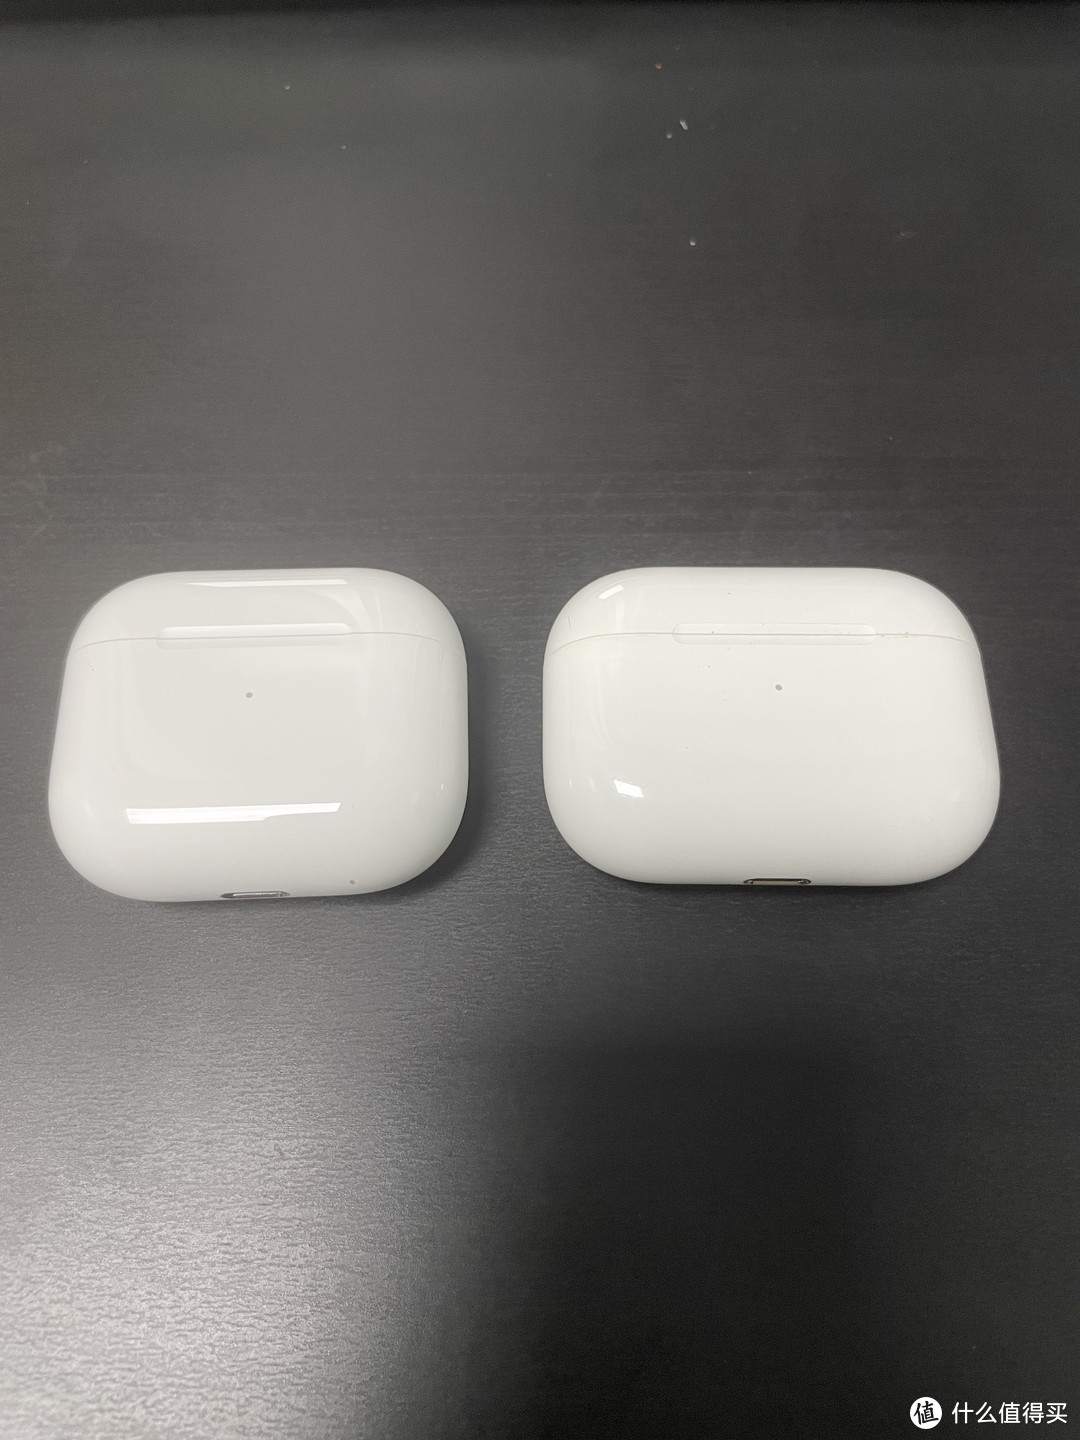 AirPods 3 VS. AirPods Pro （正面）